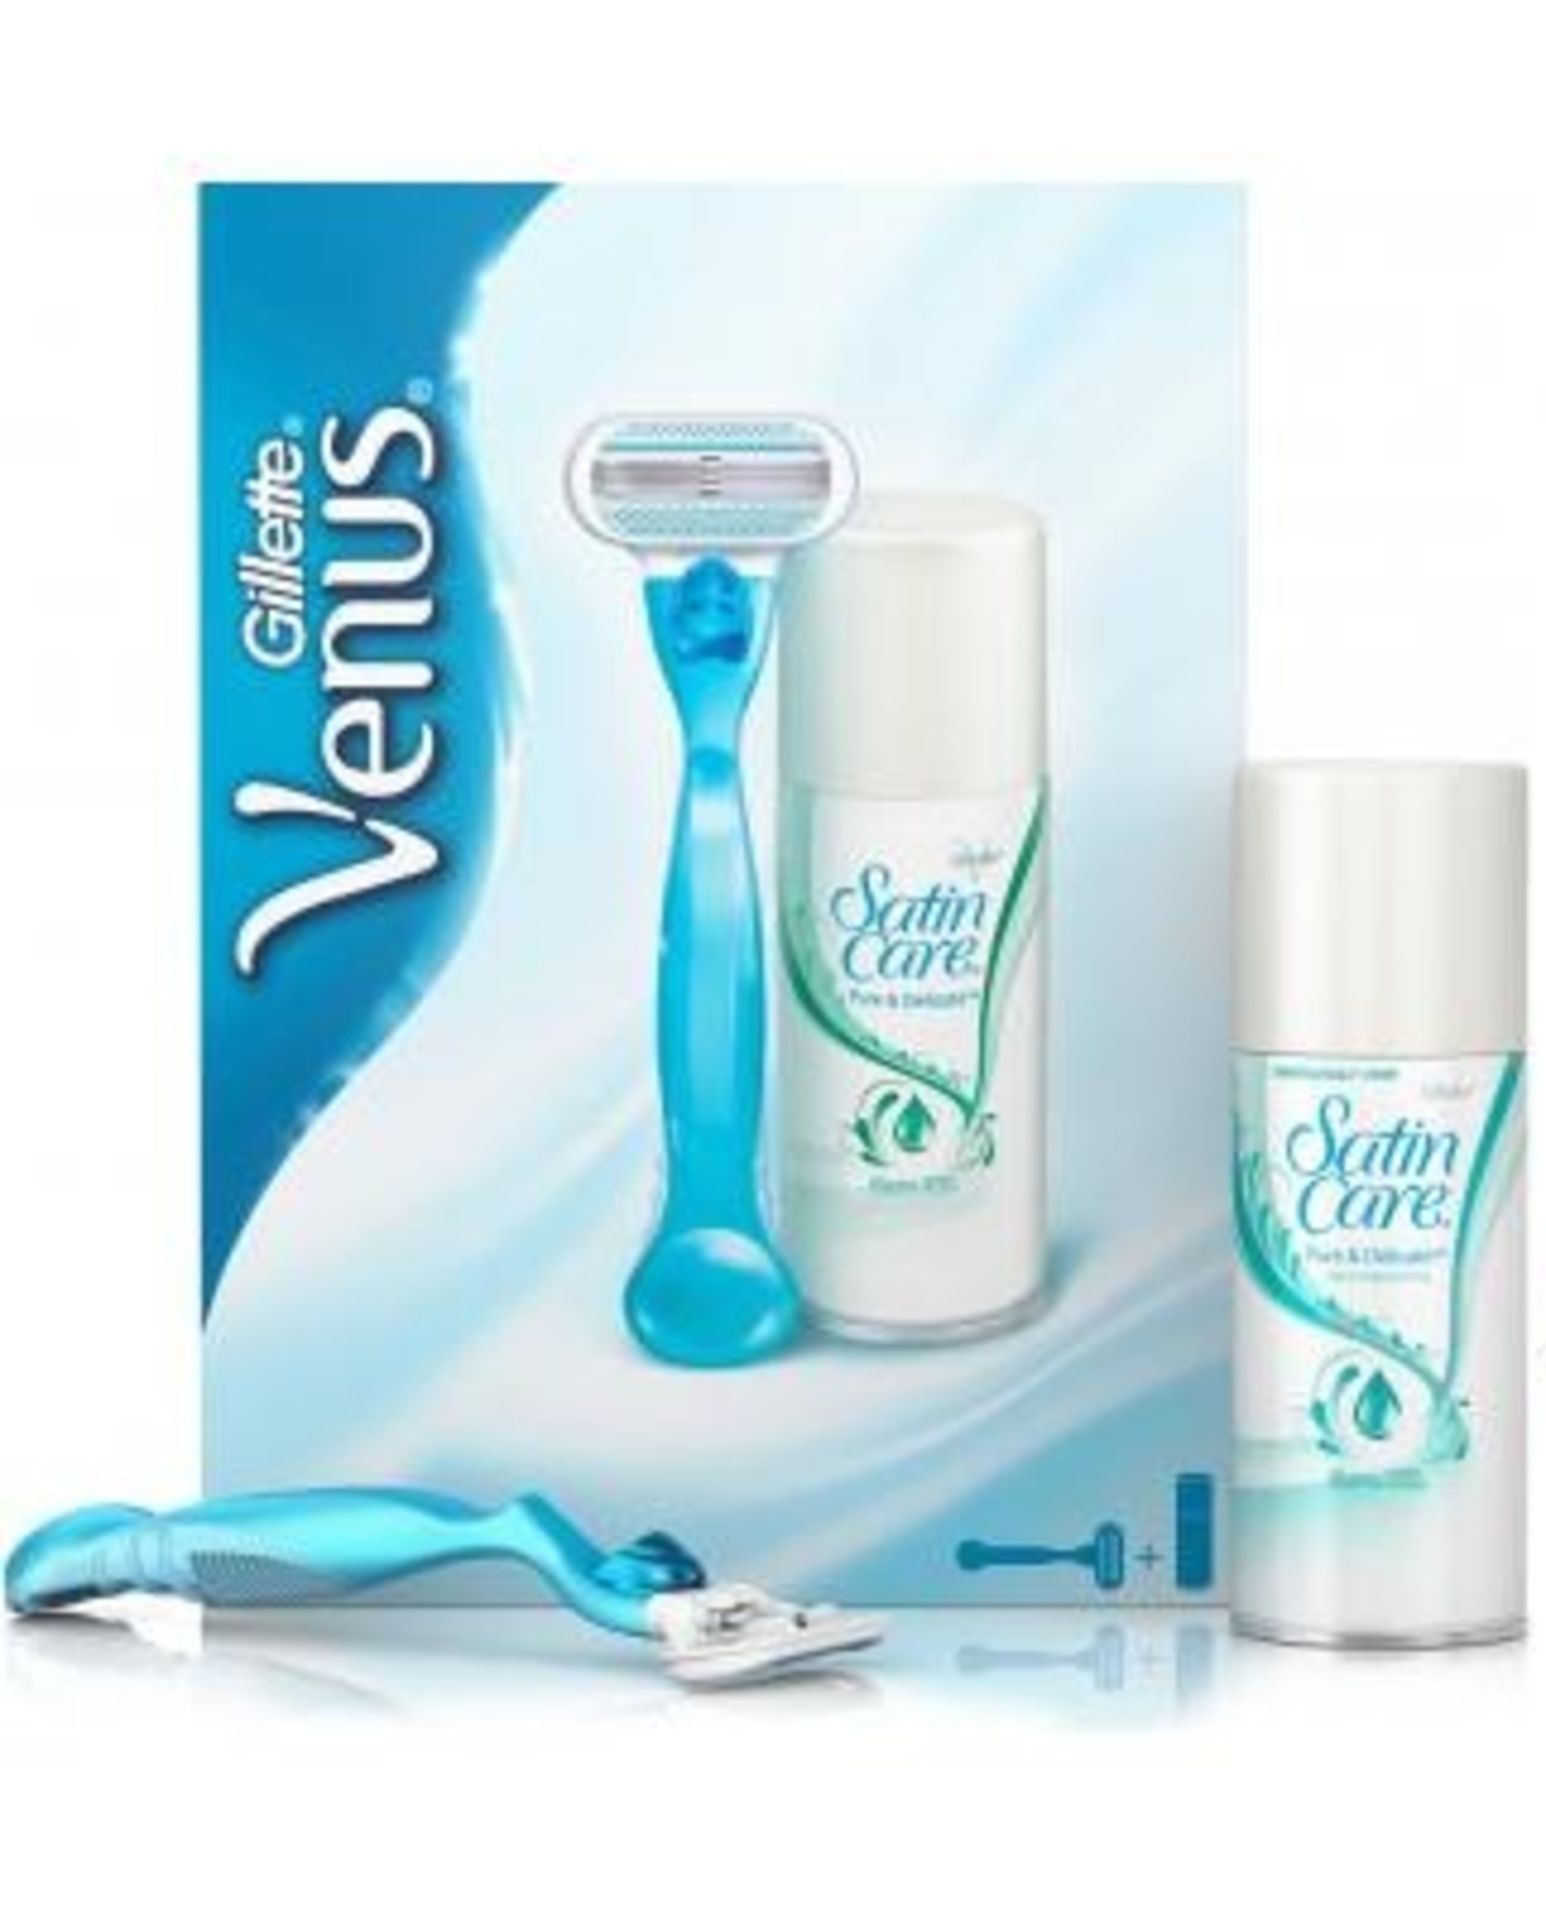 V *TRADE QTY* Brand New Gillette Venus Satin Care Pure & Delicate Set With Razor And Shave Gel X